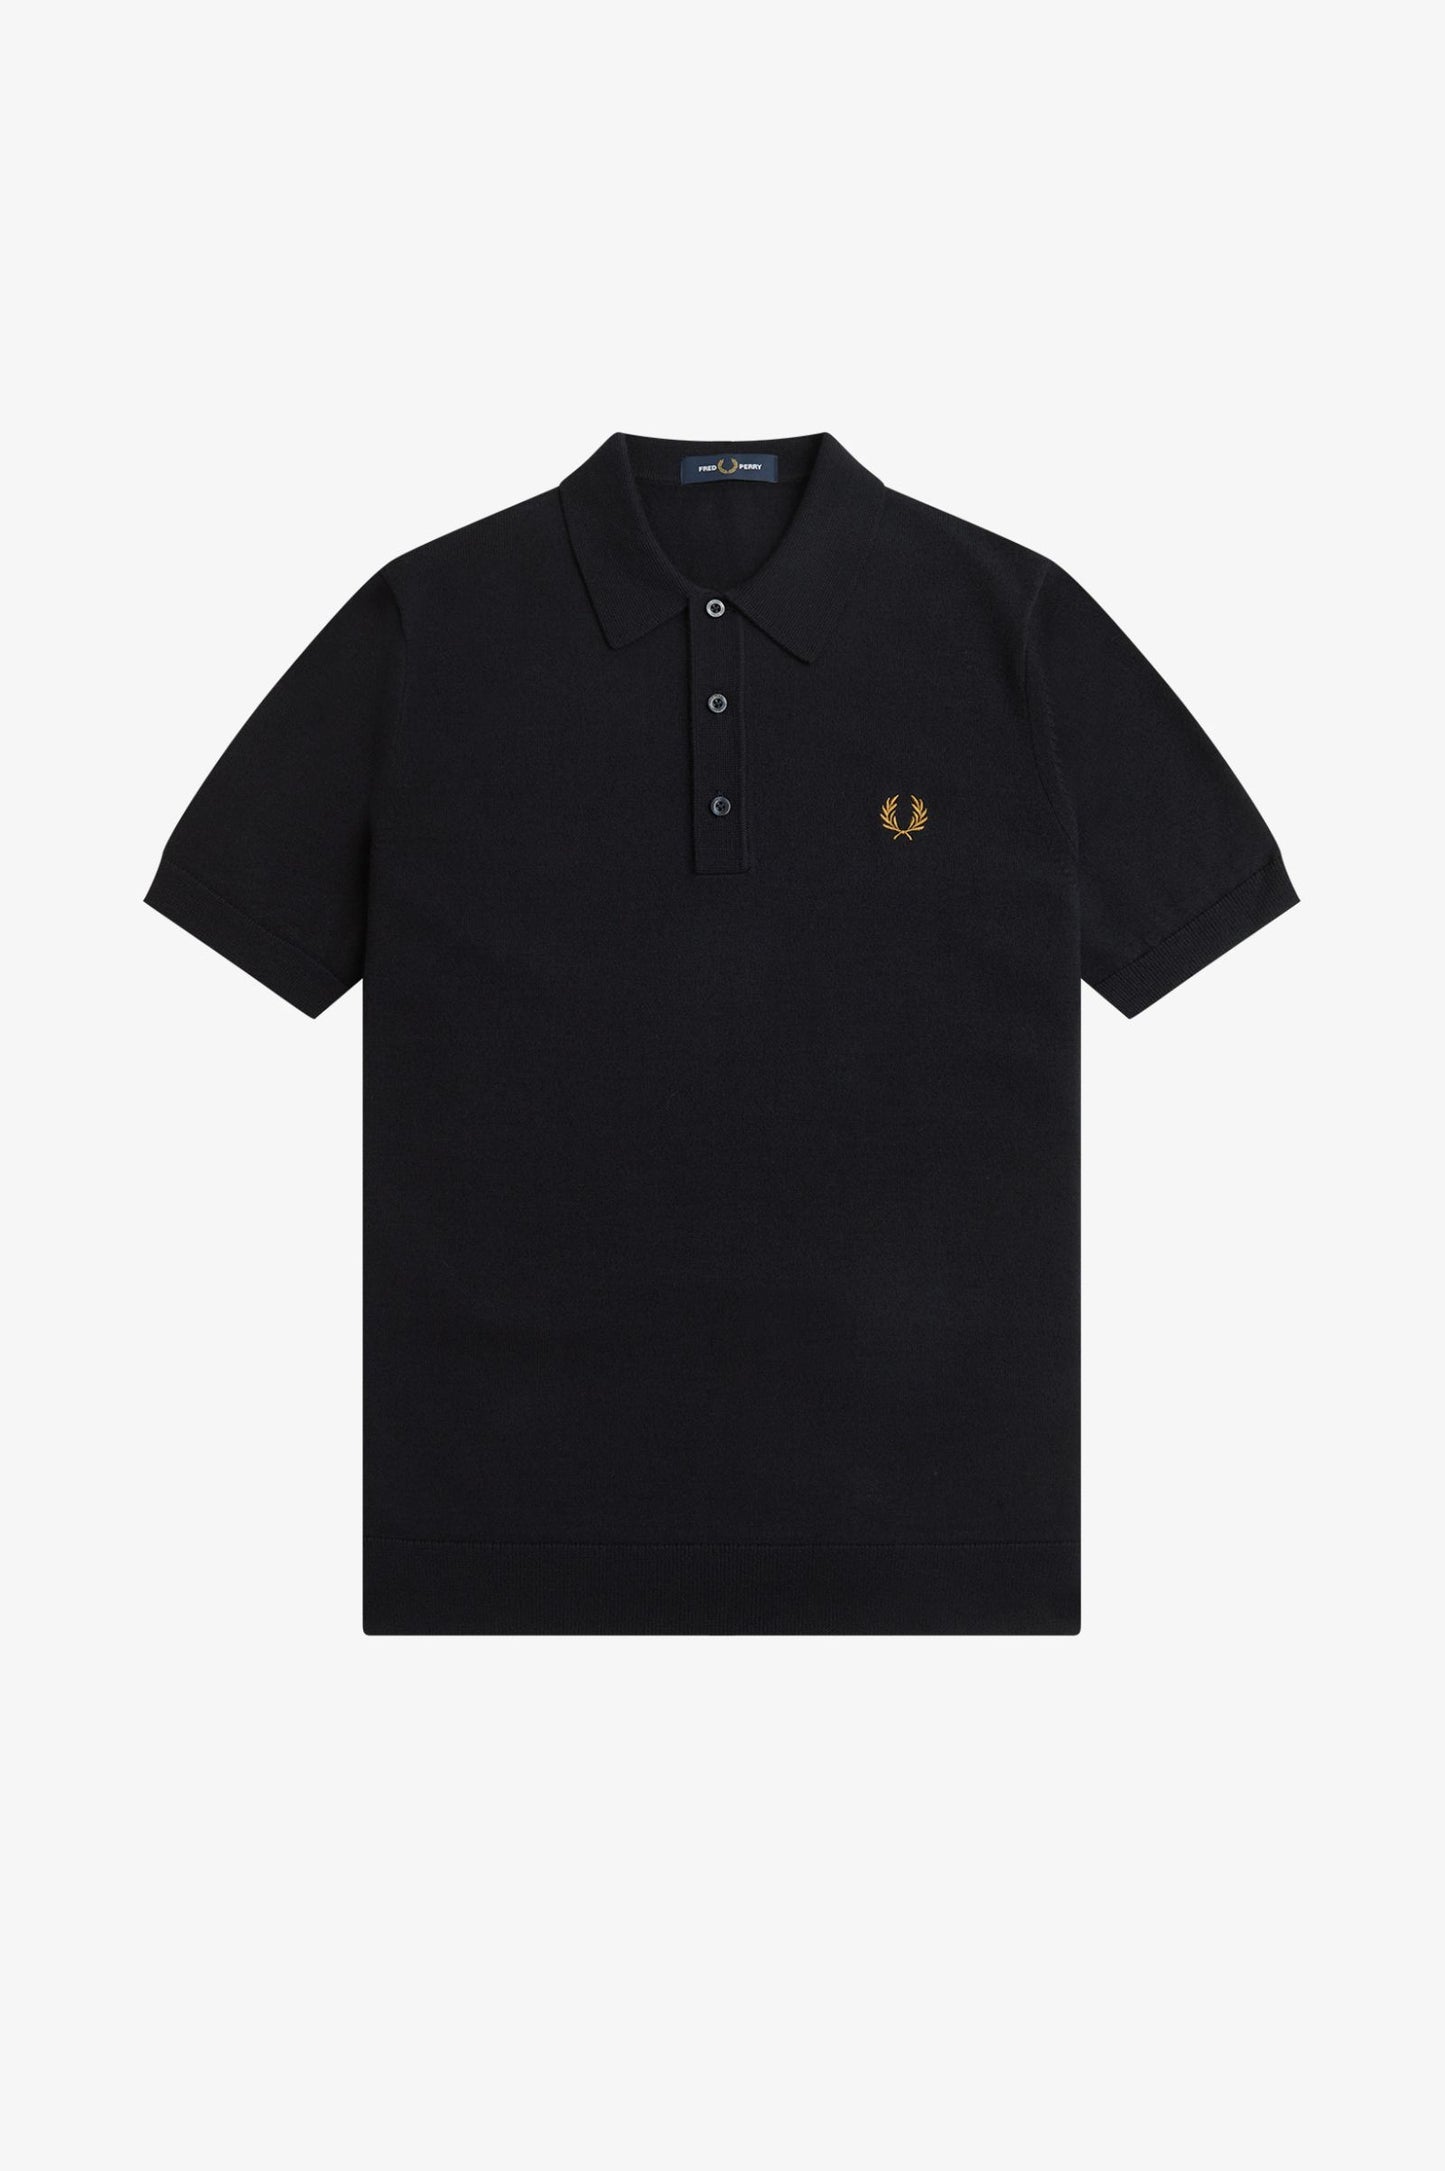 Fred Perry Classic Knitted Shirt K7623